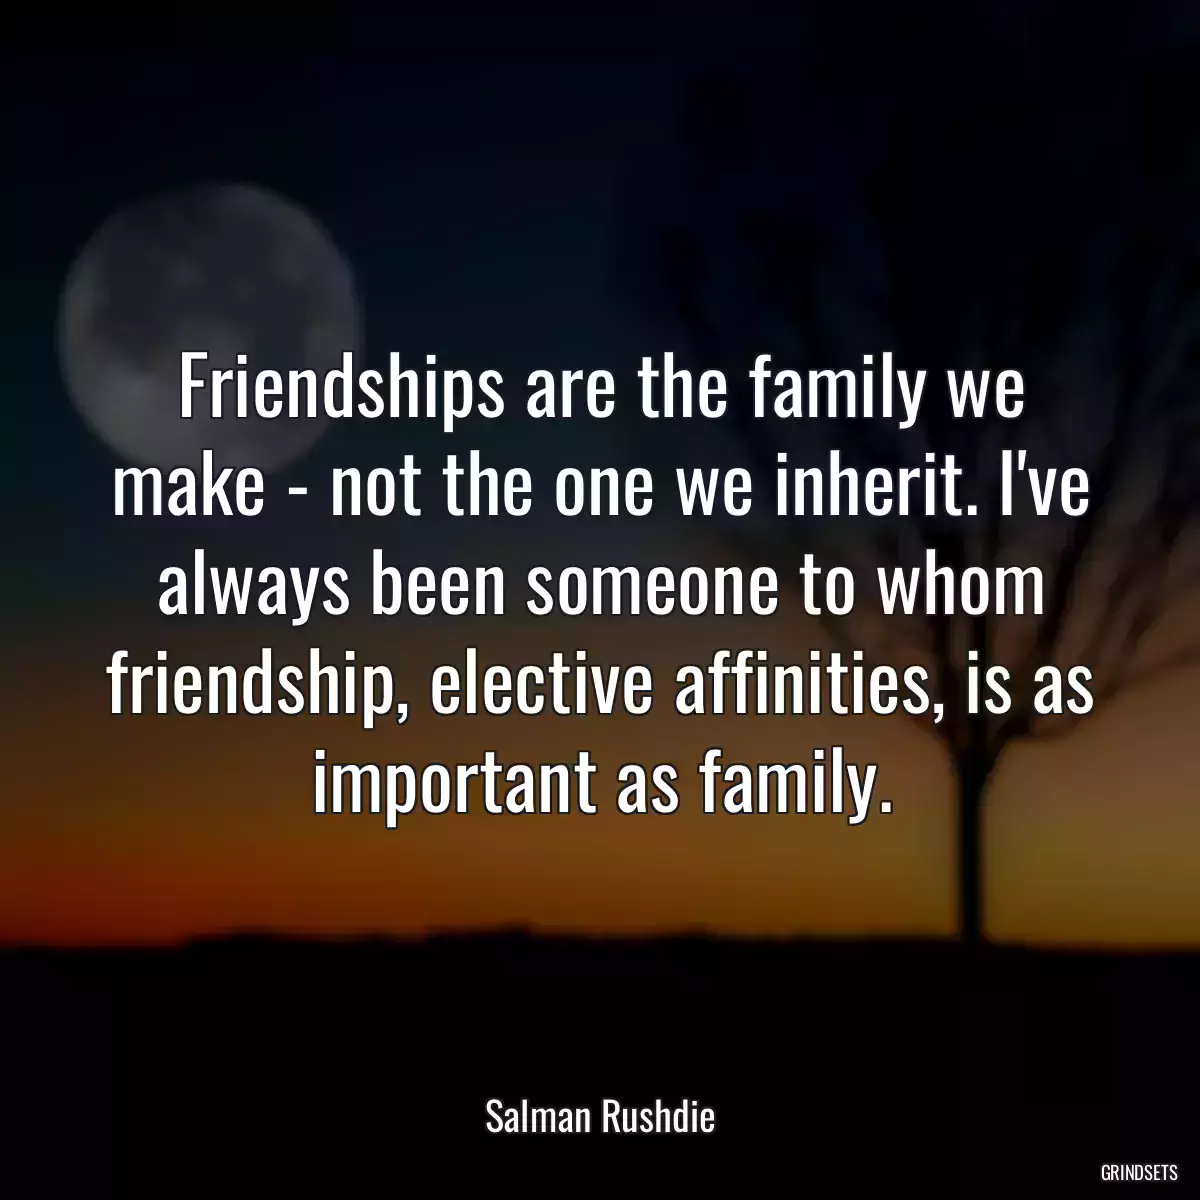 Friendships are the family we make - not the one we inherit. I\'ve always been someone to whom friendship, elective affinities, is as important as family.